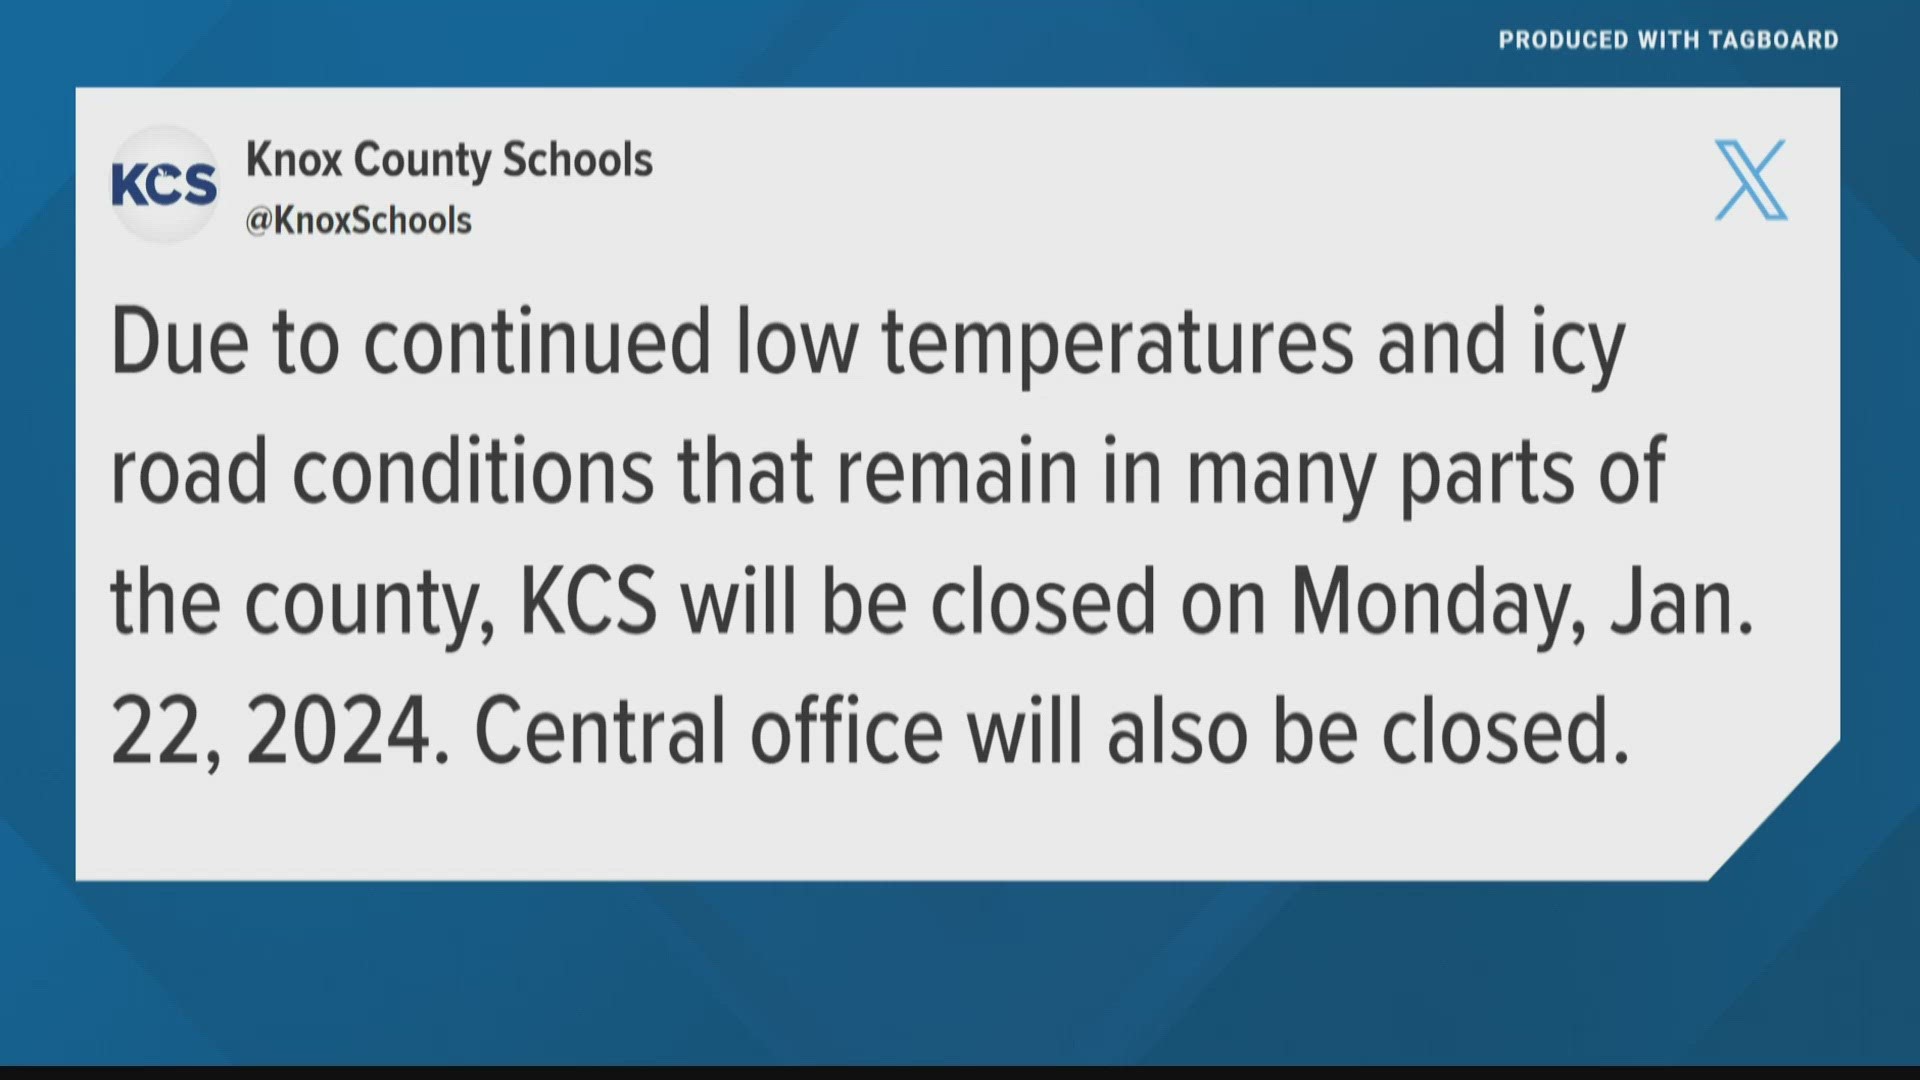 Schools in Anderson, Blount, Campbell, Cumberland, Sevier County and more will be closed on Monday.